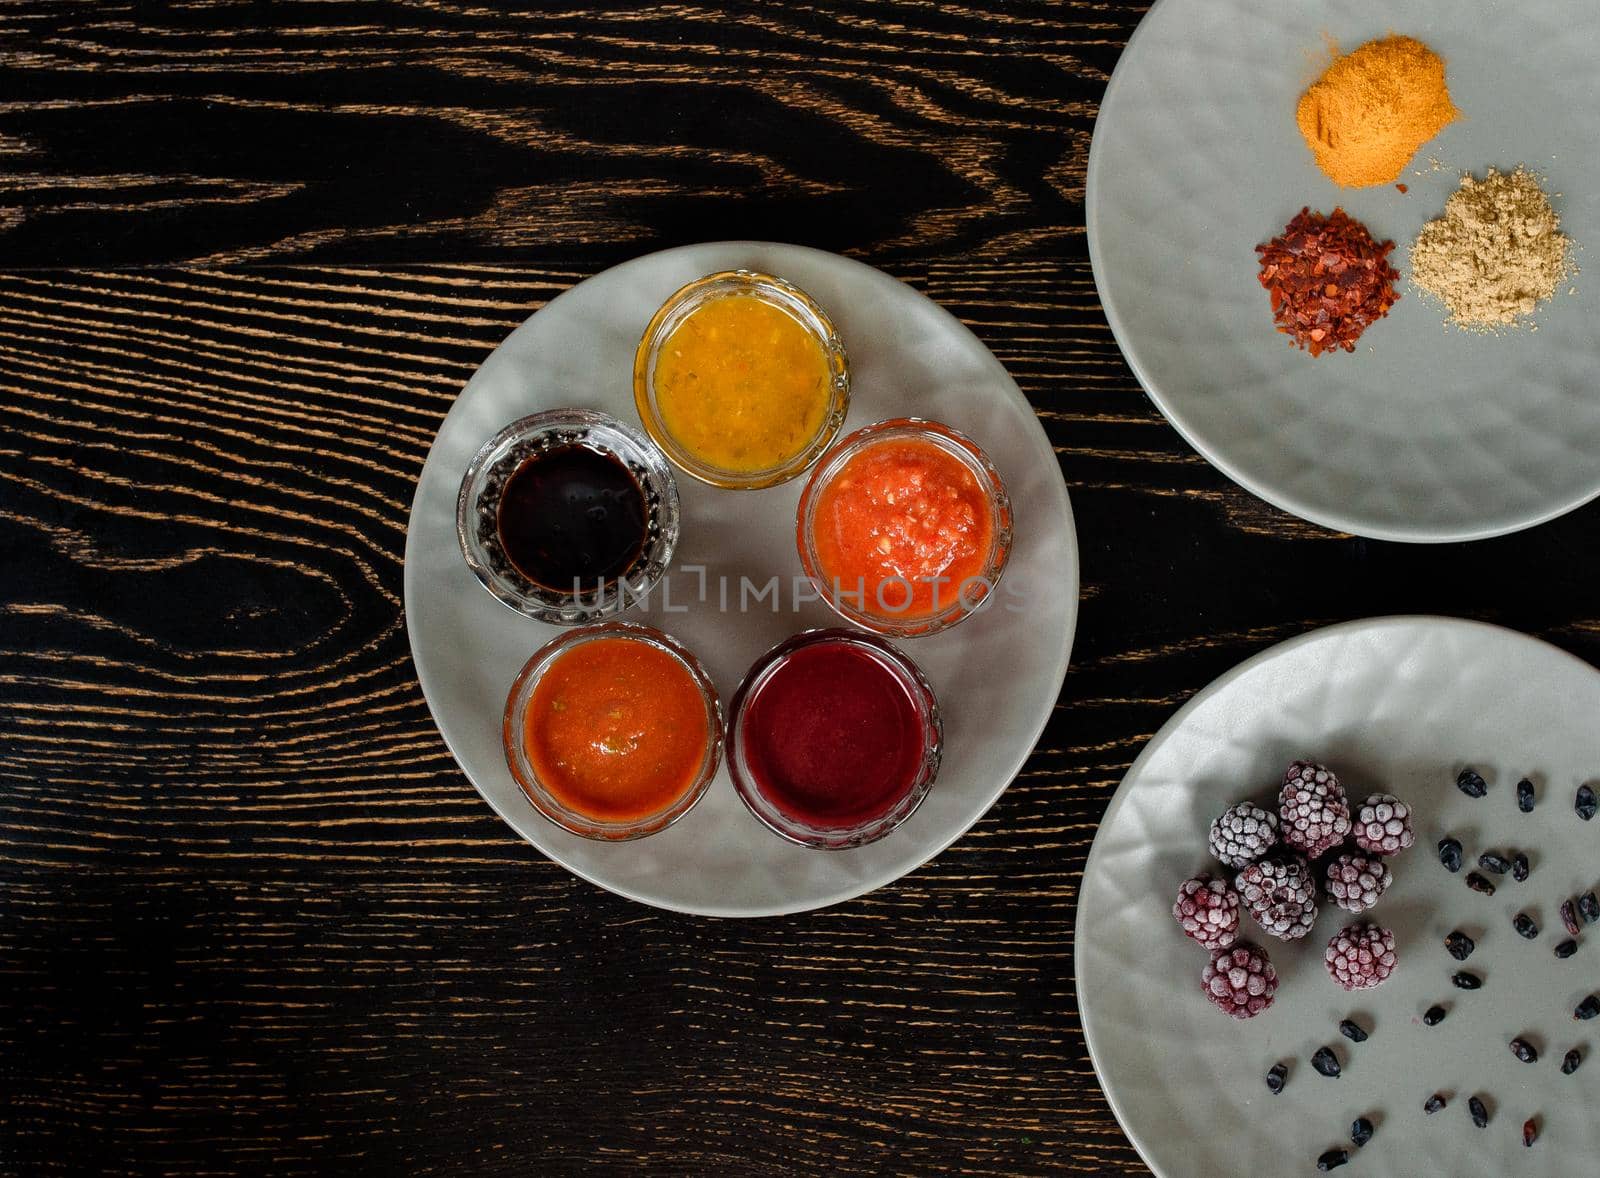 Assortment of sauces, spices, frozen berries on gray plates on a dark wooden table. View from above.